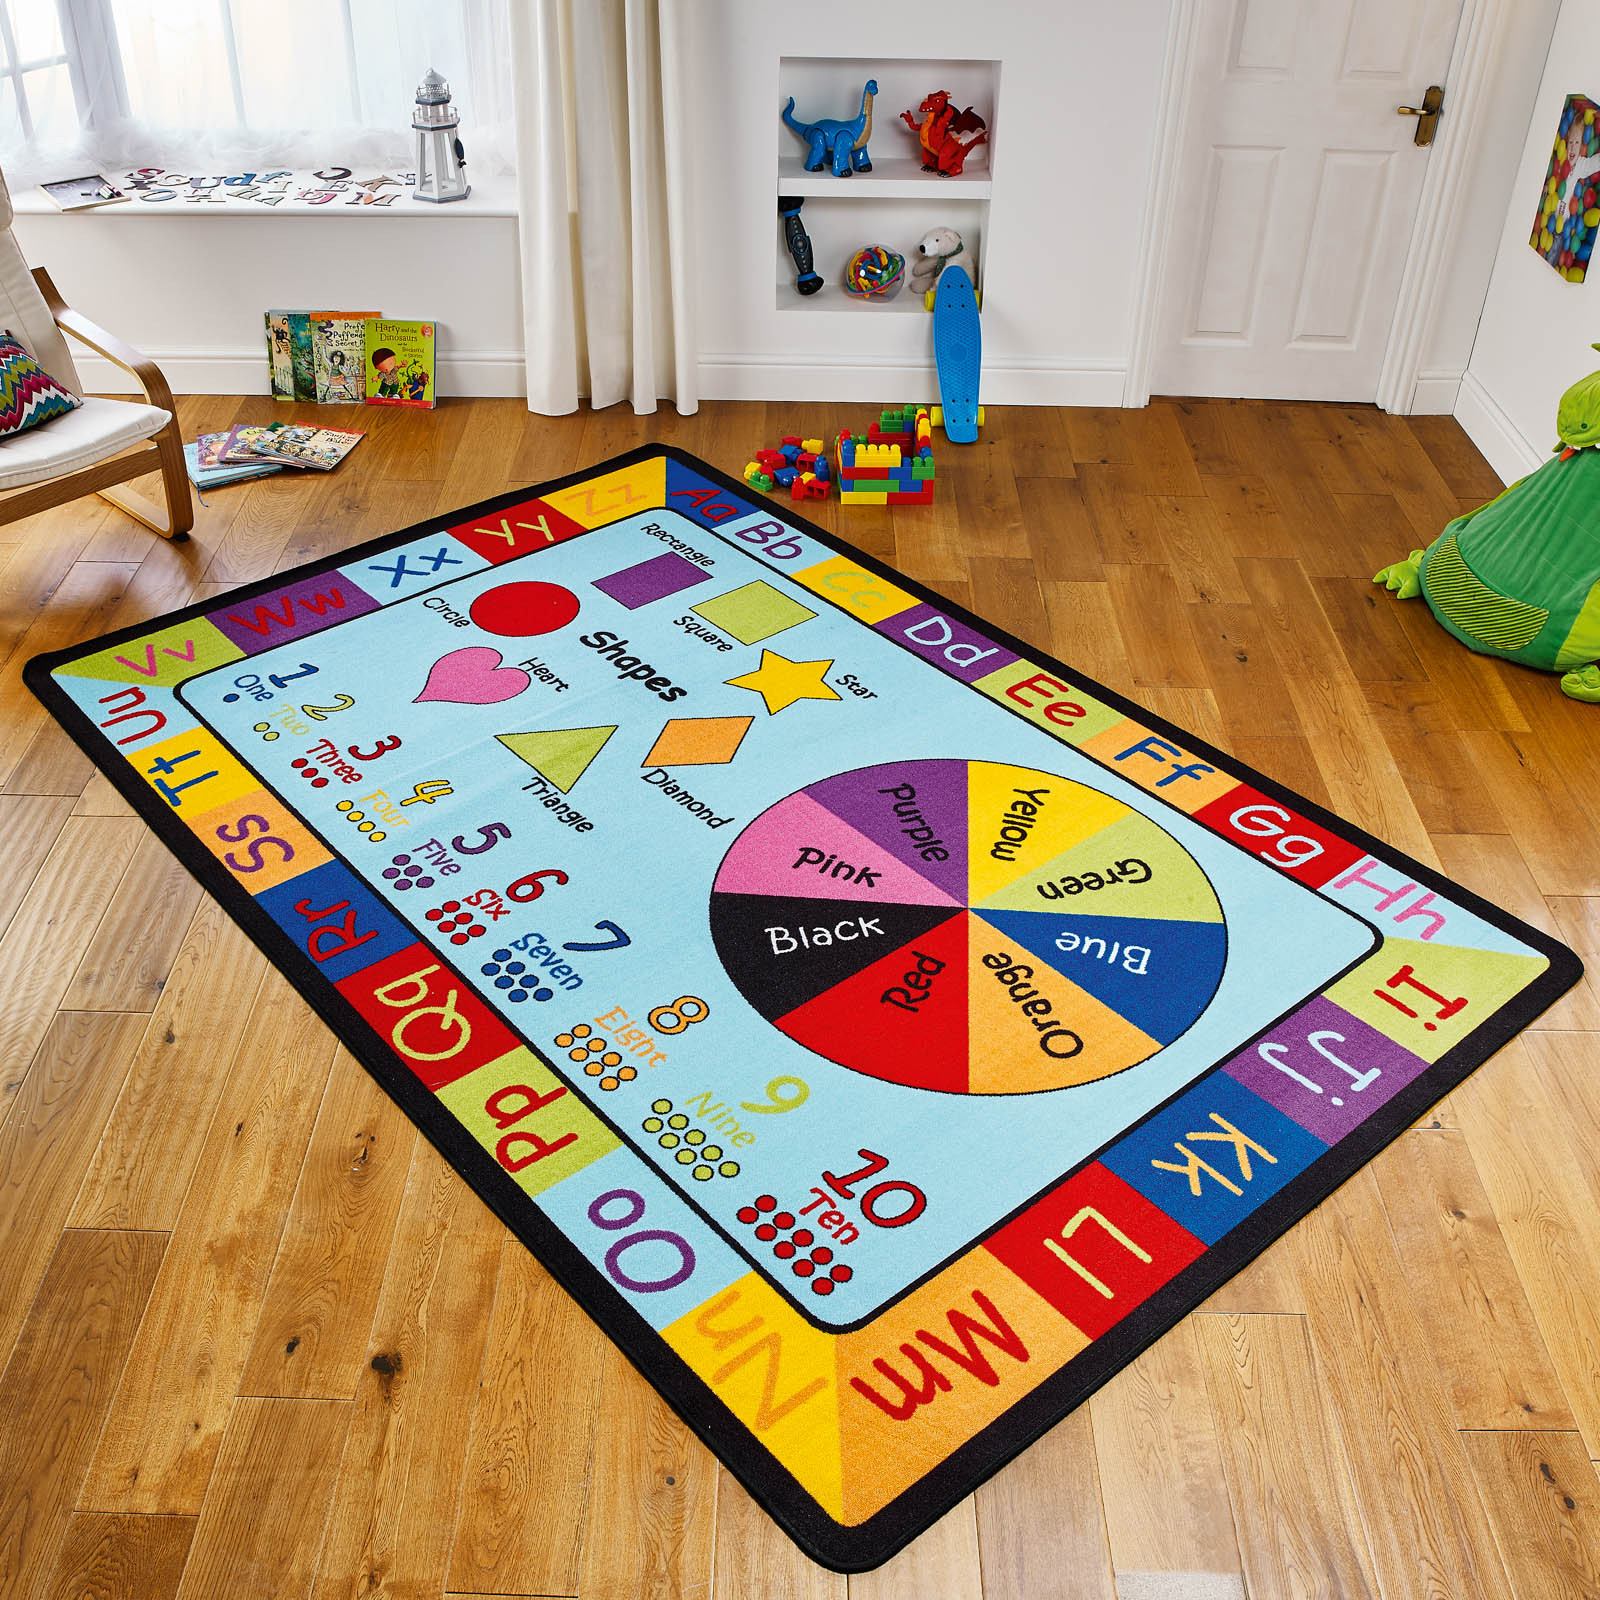 Carpet For Kids Bedroom
 How To Choose The Best Kids Rugs For Your Child s Bedroom